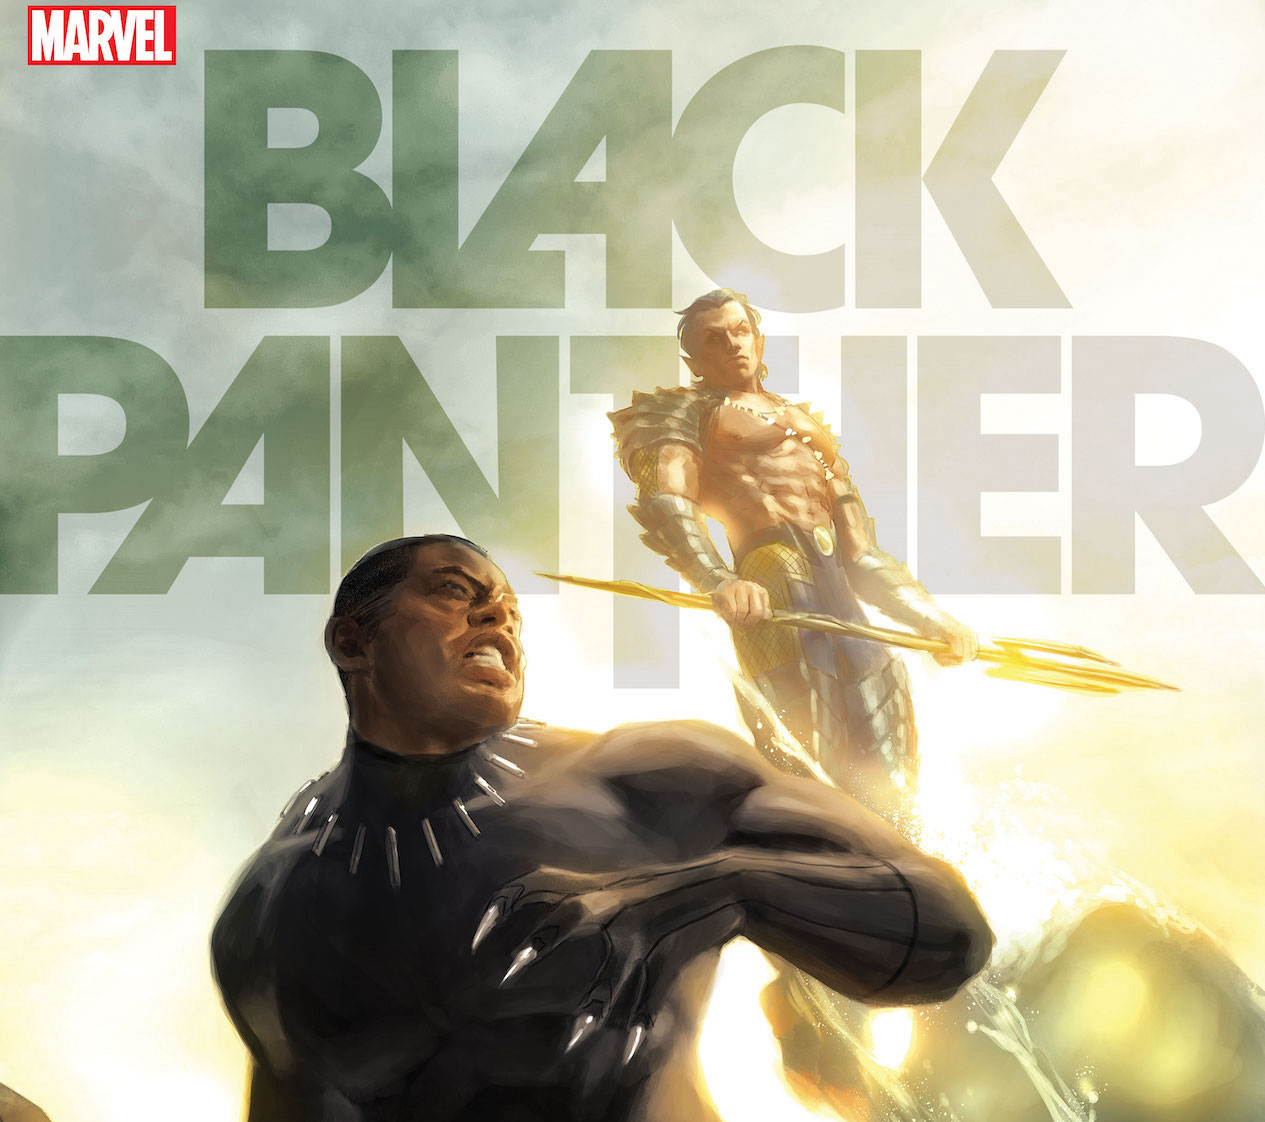 Namor teams up with T’Challa in battle against the Avengers in 'Black Panther' #13